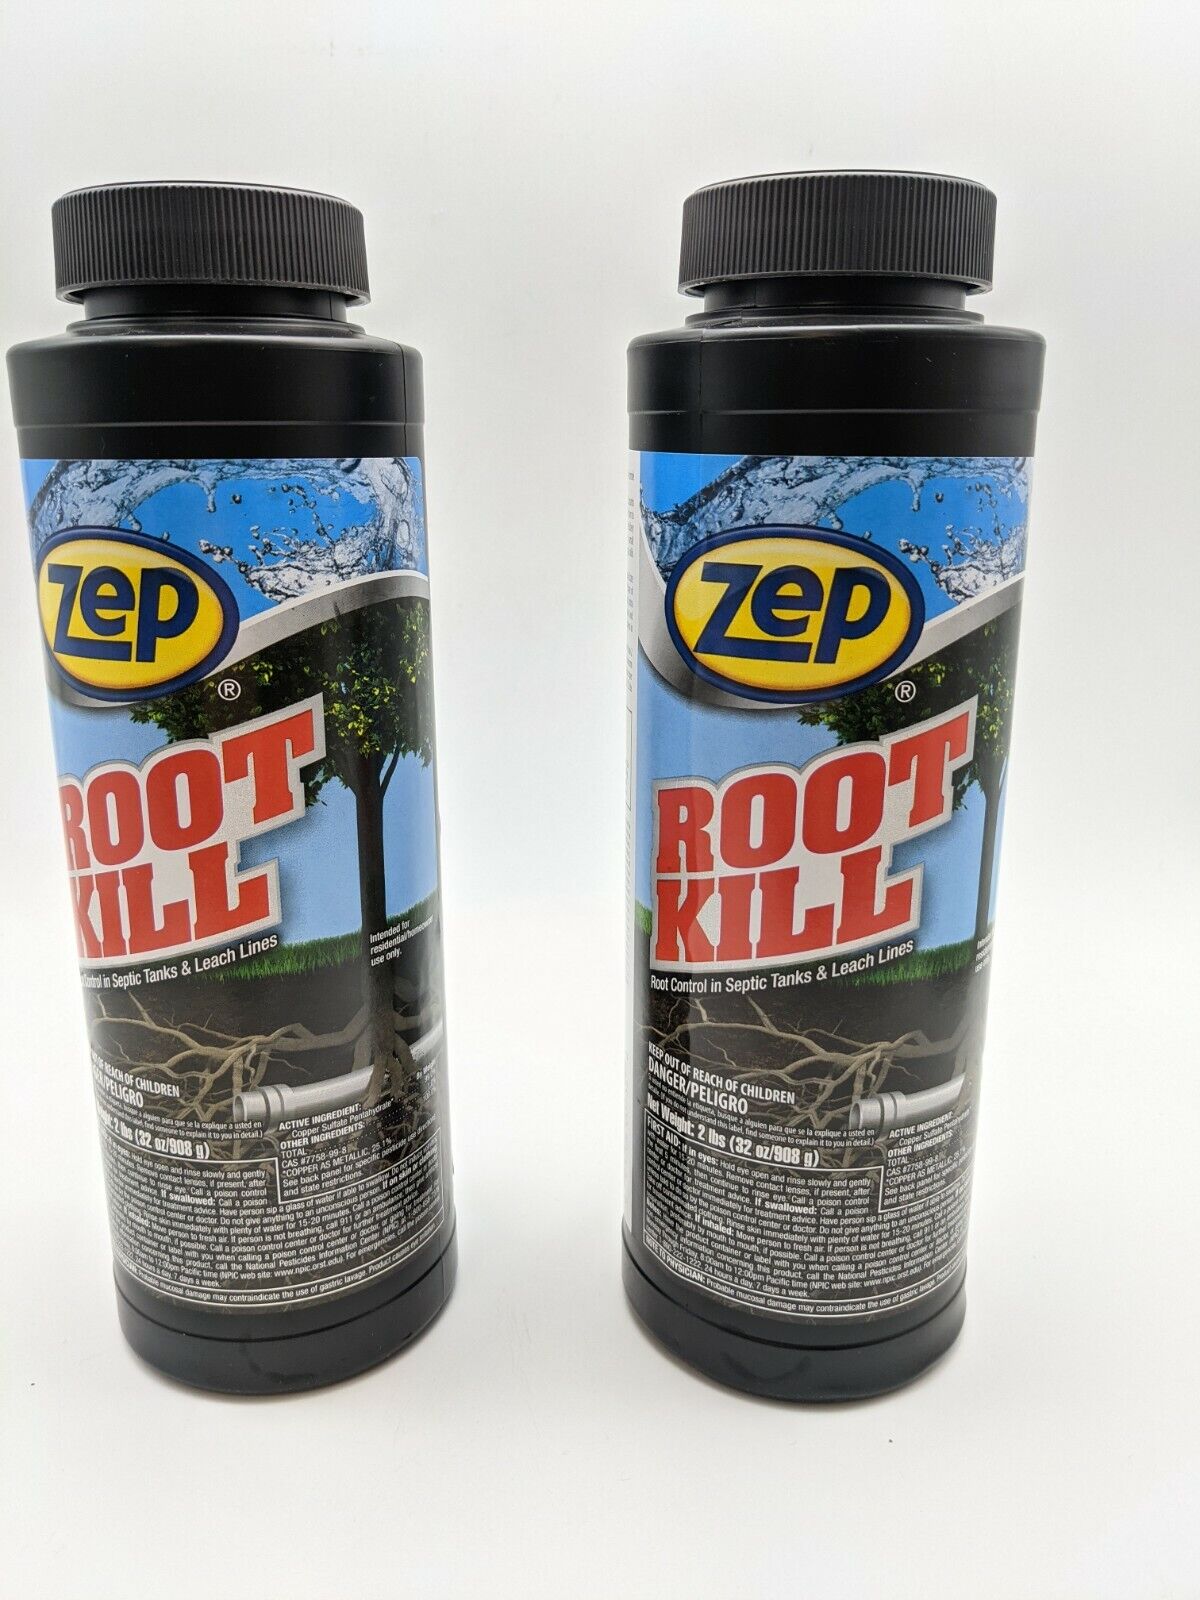 (2 PACK) 32 oz. Root Kill Dissolve Roots Inside Pipes & Drains Prevent Clogs ZEP ZROOT24